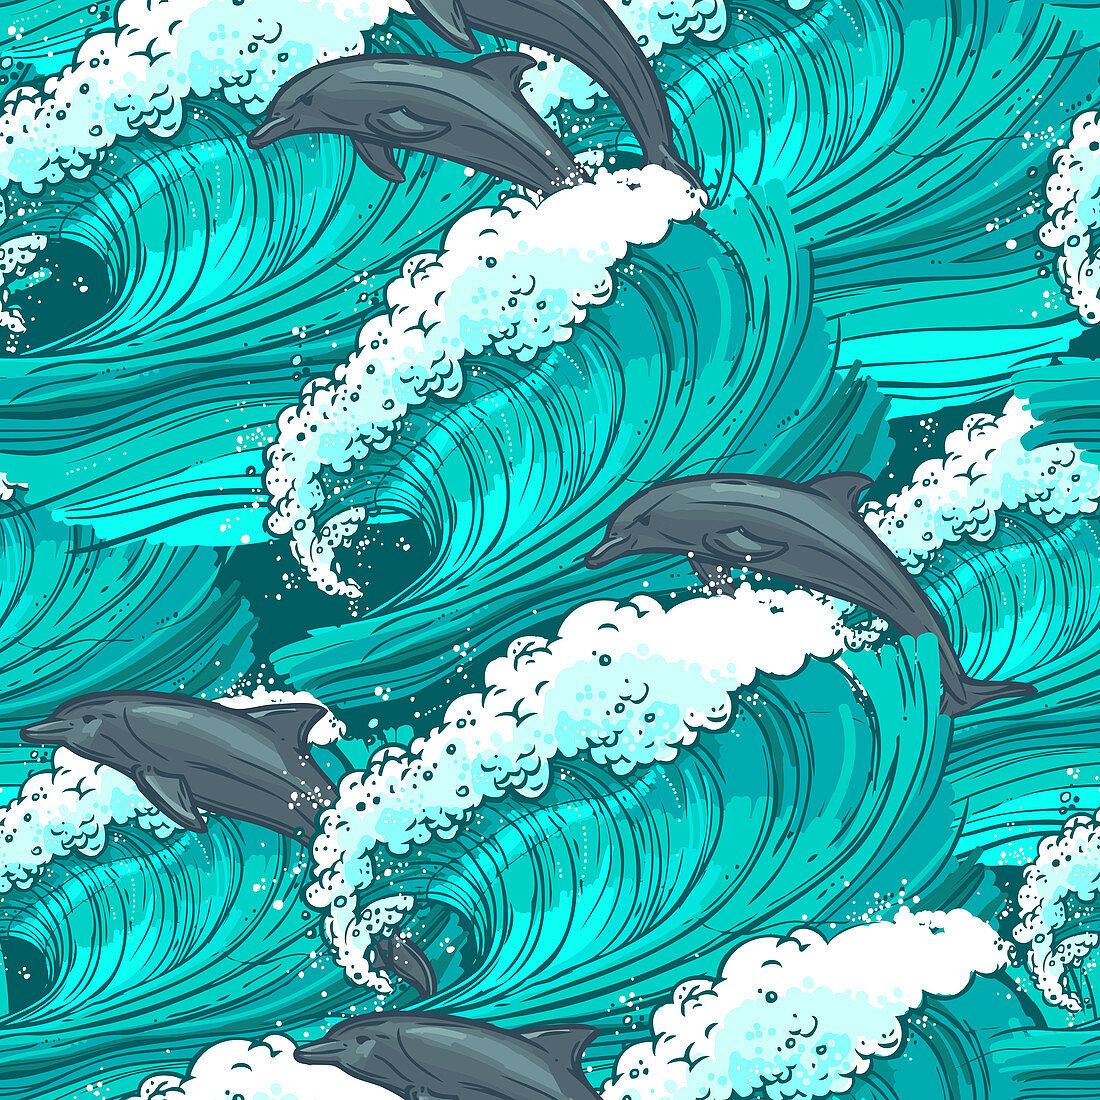 Ocean and dolphins, illustration